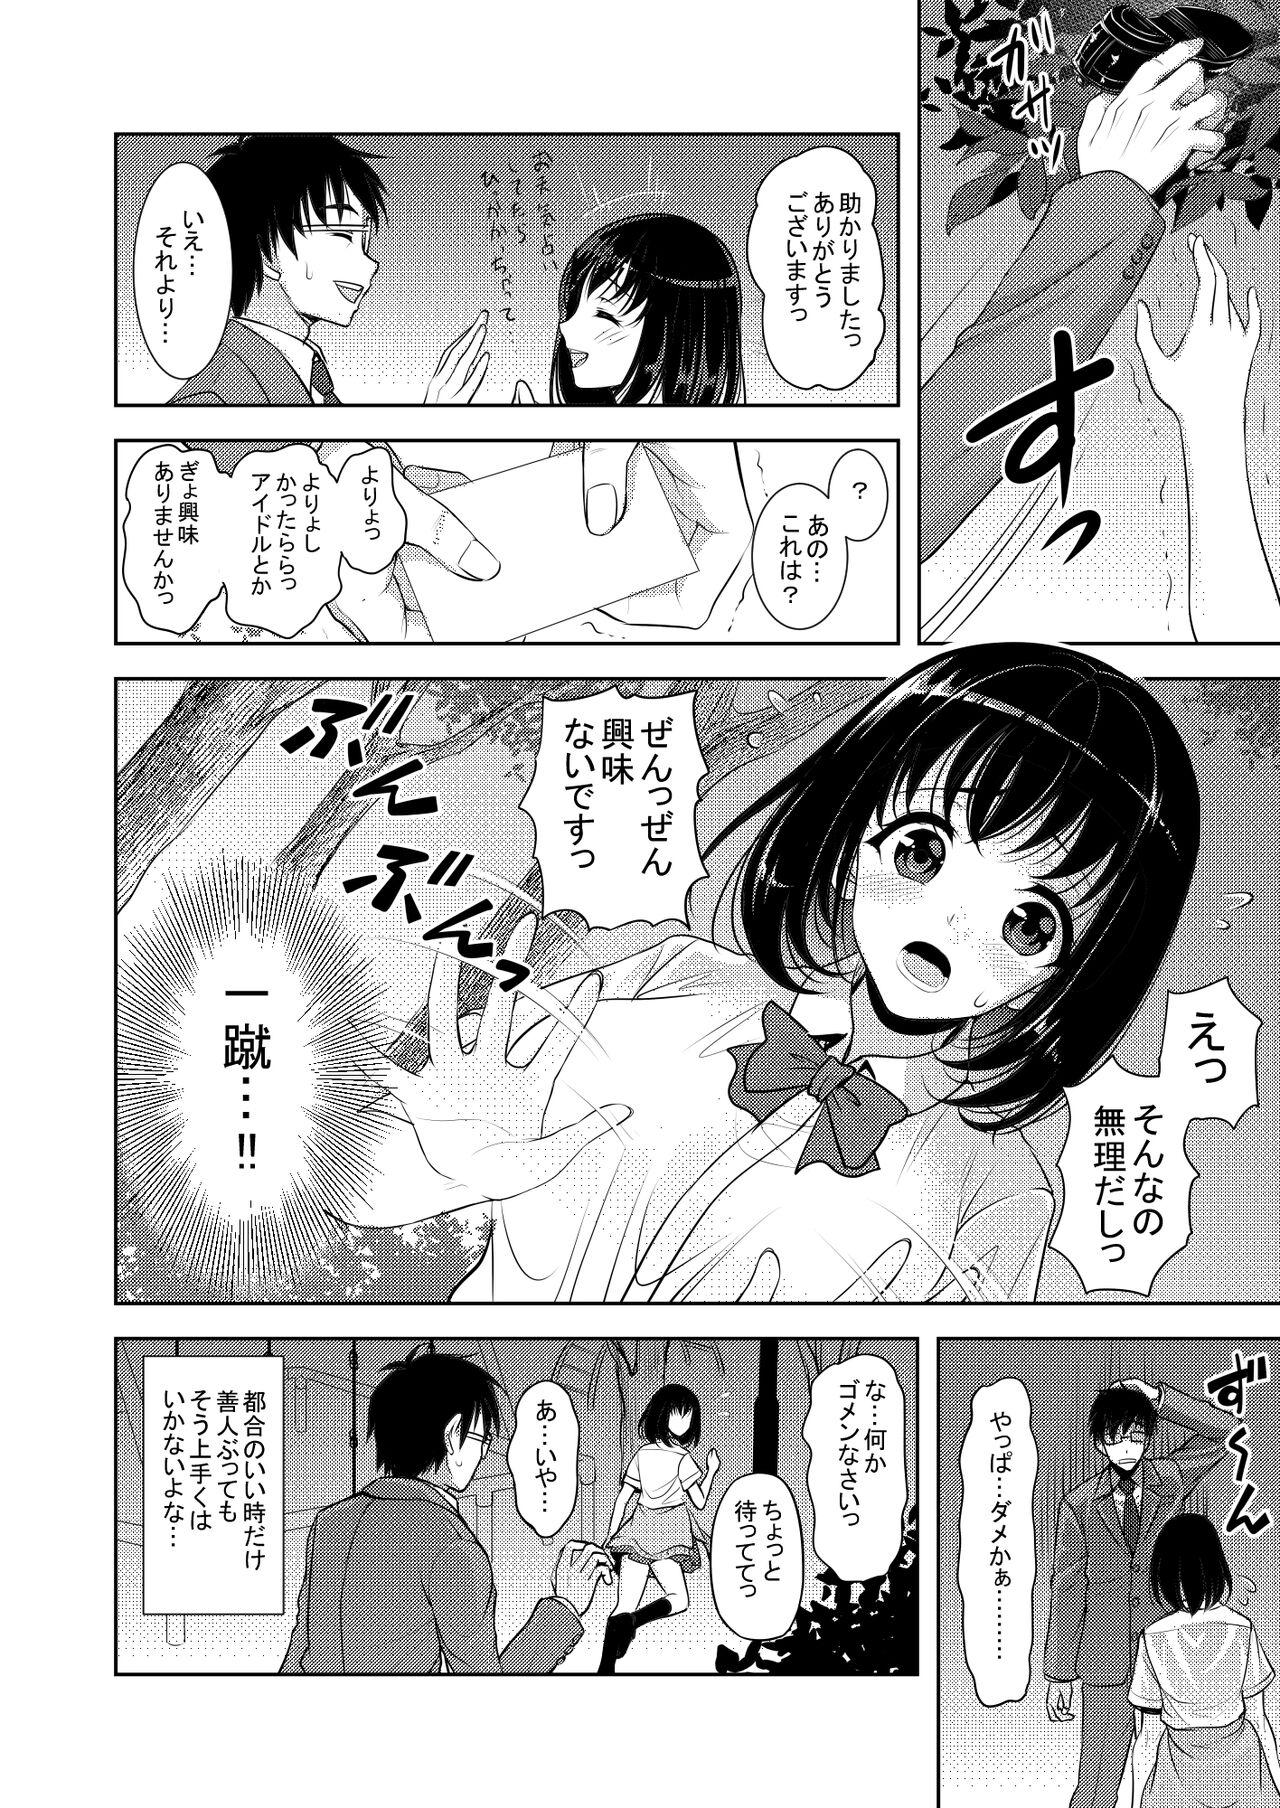 Shaven ゆるふわびっち Con - Page 3